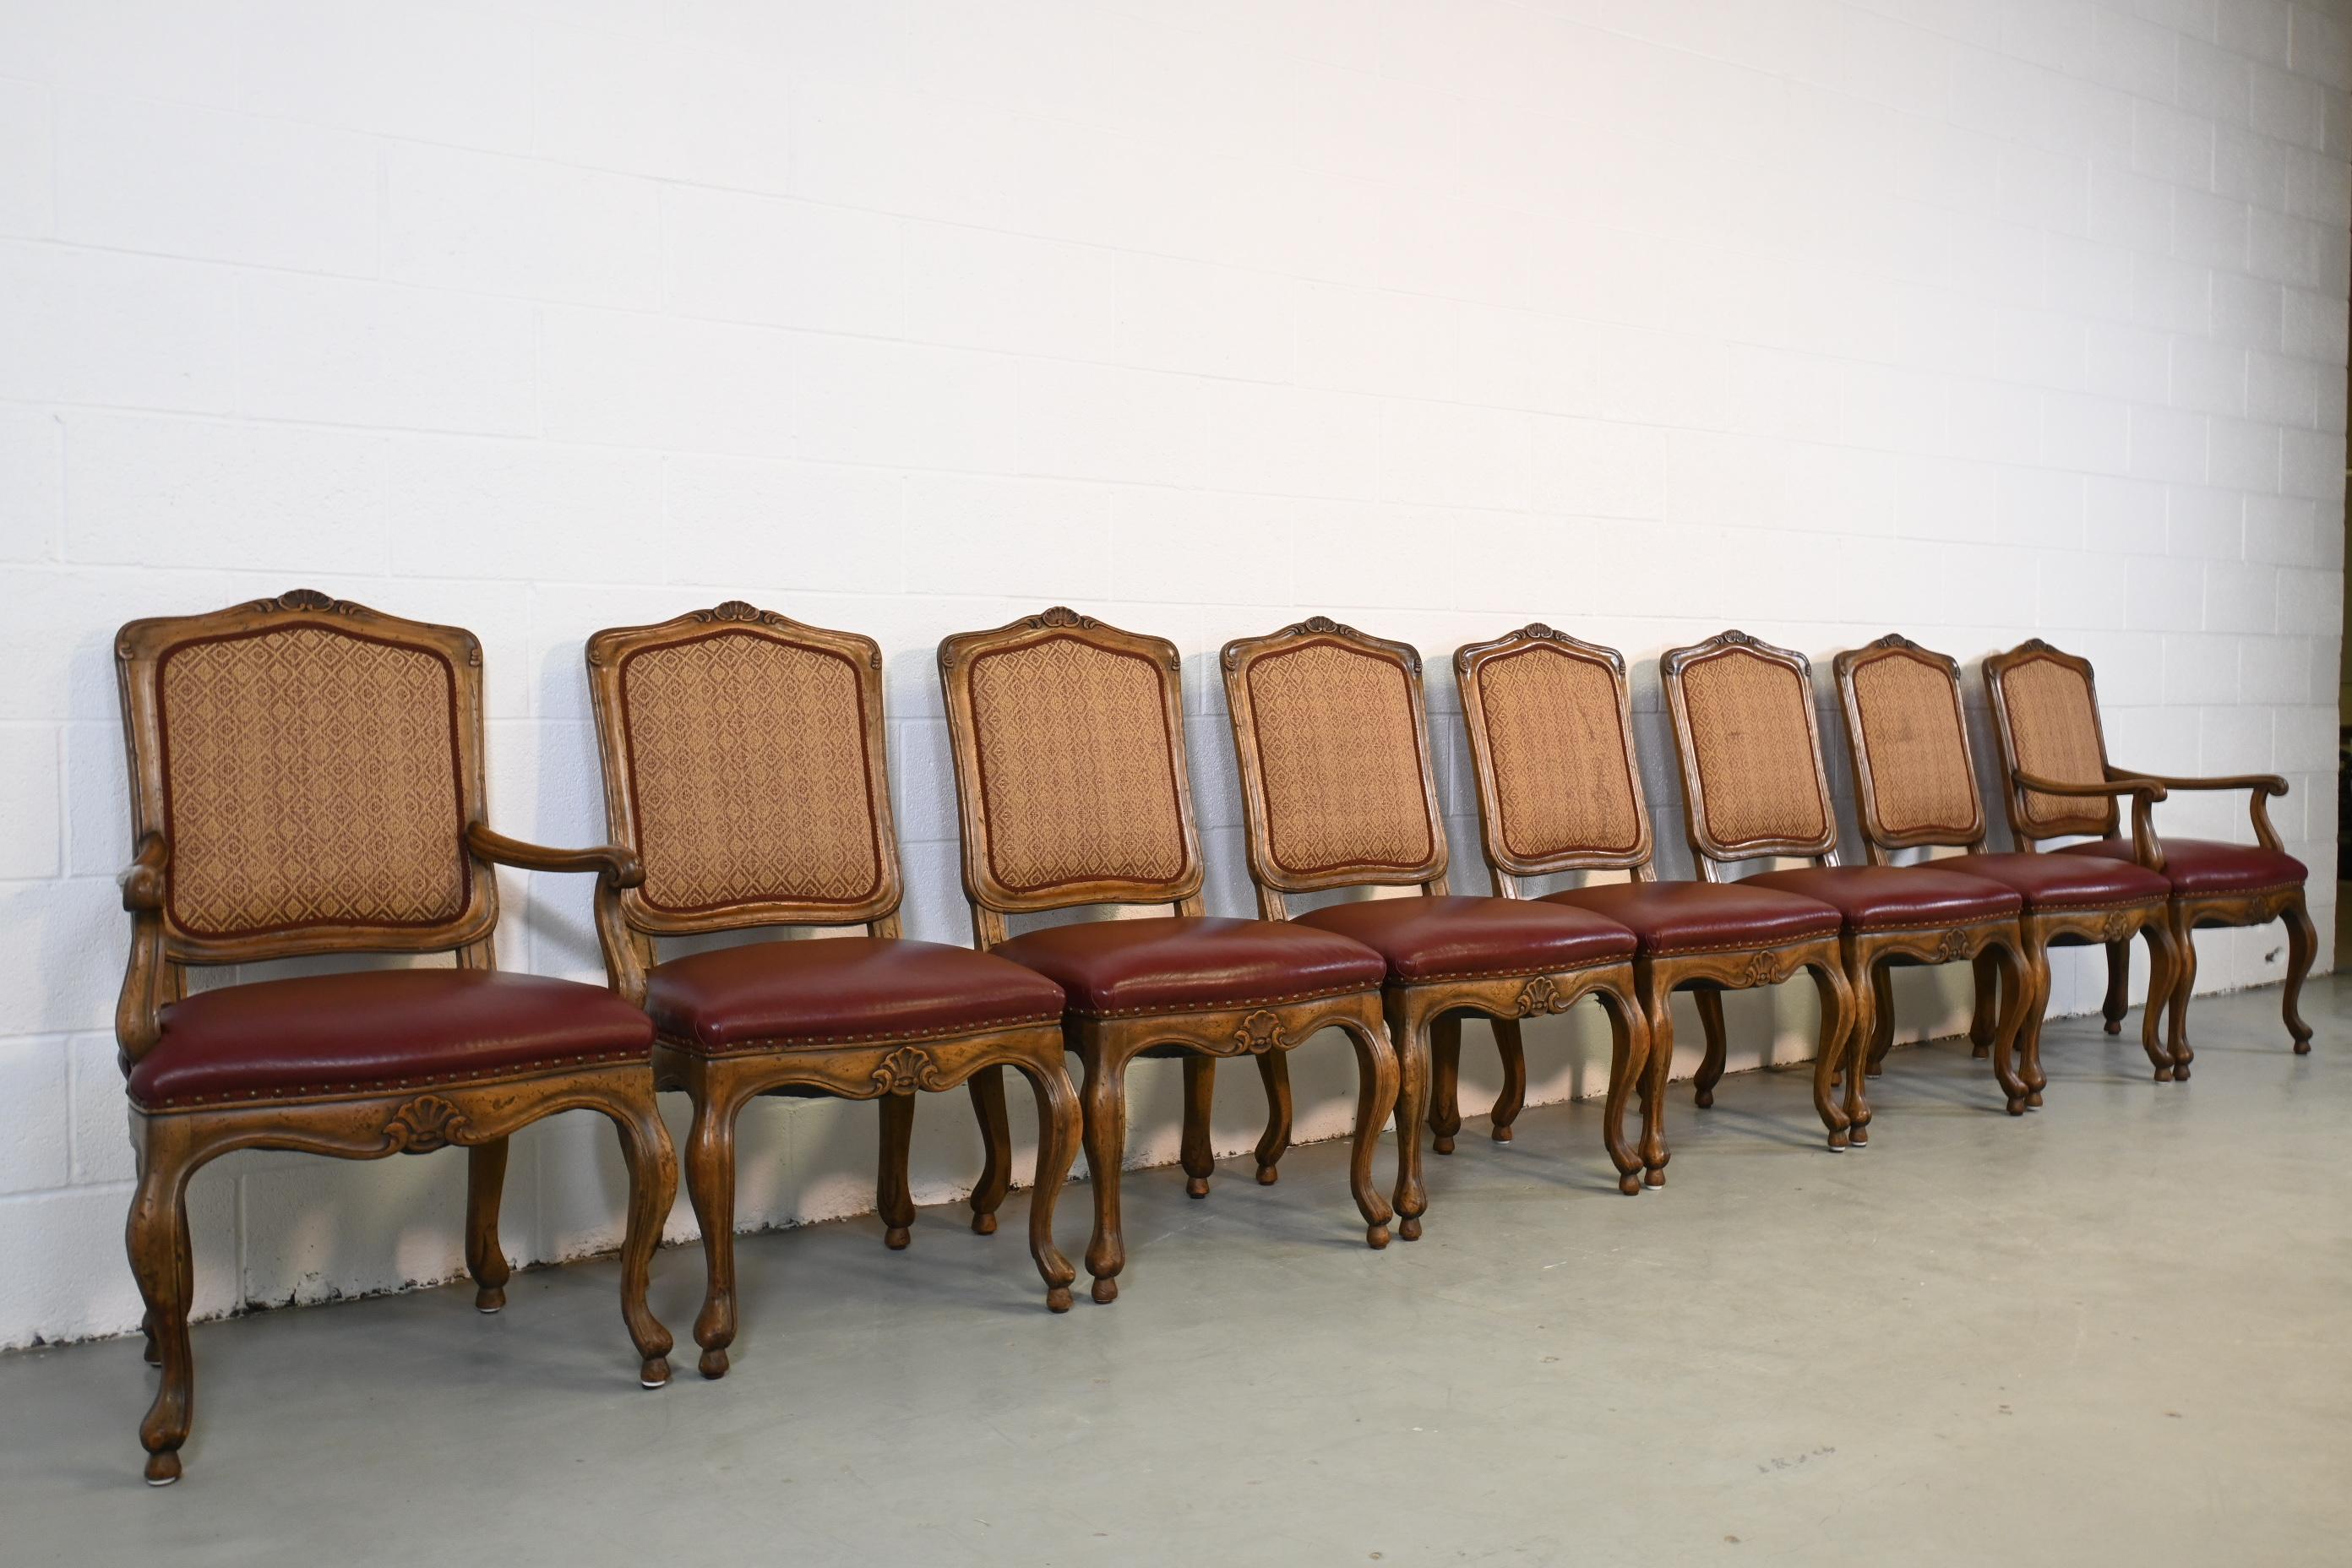 Baker Furniture French Provincial dining chairs

Baker Furniture, USA, 1980s

Armchairs: 23.25